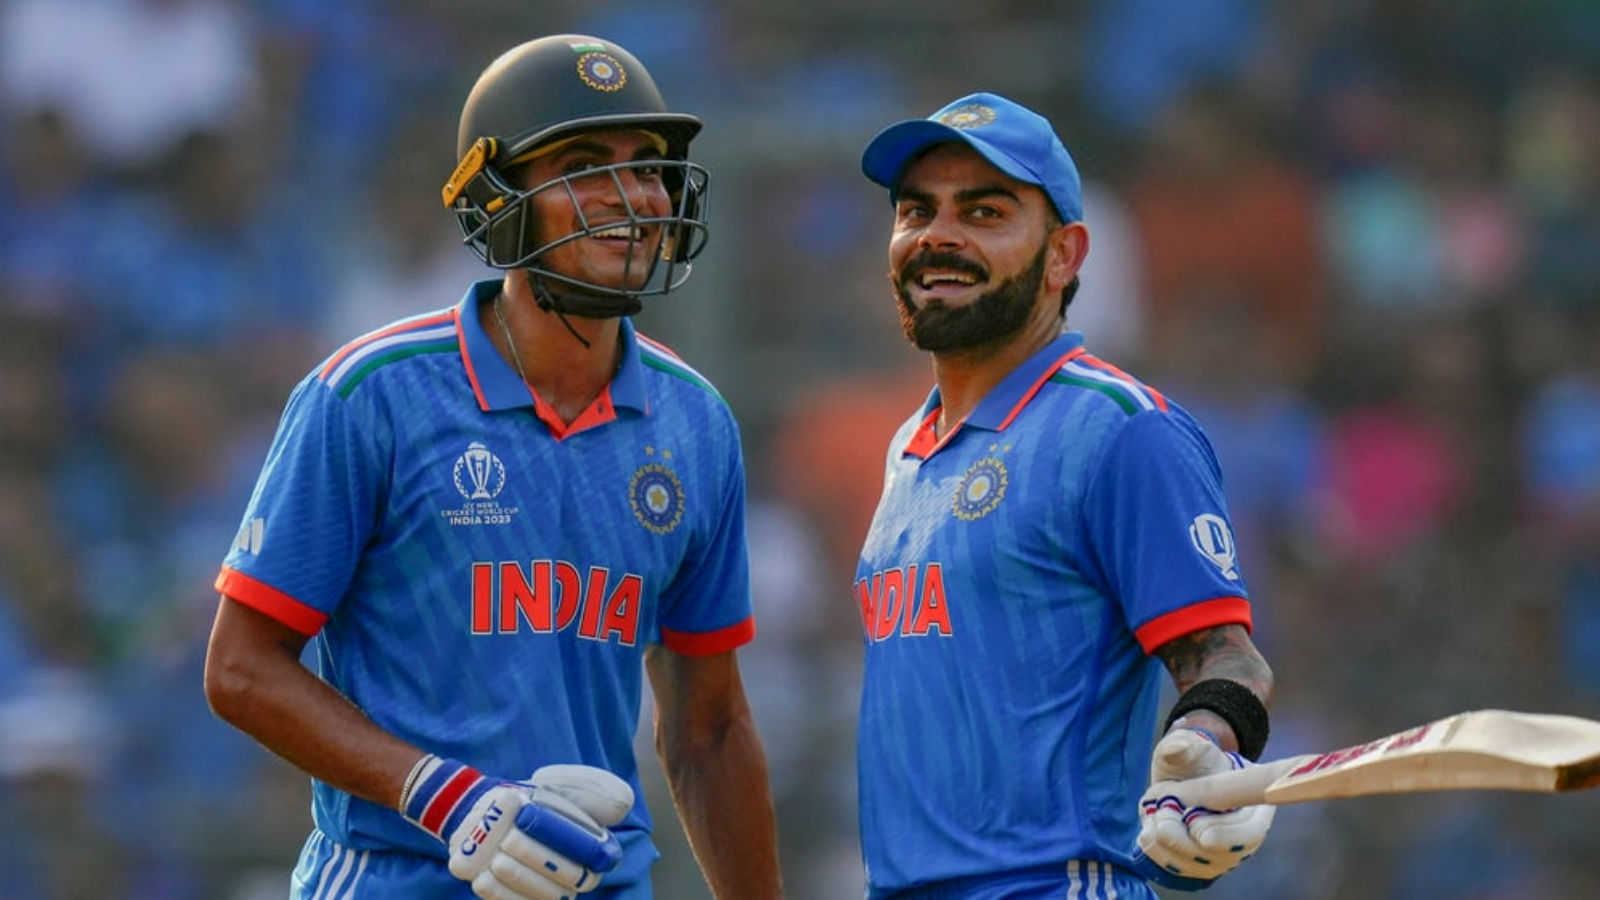 Shubman Gill and Virat Kohli | T20 World Cup | Image: Getty Images